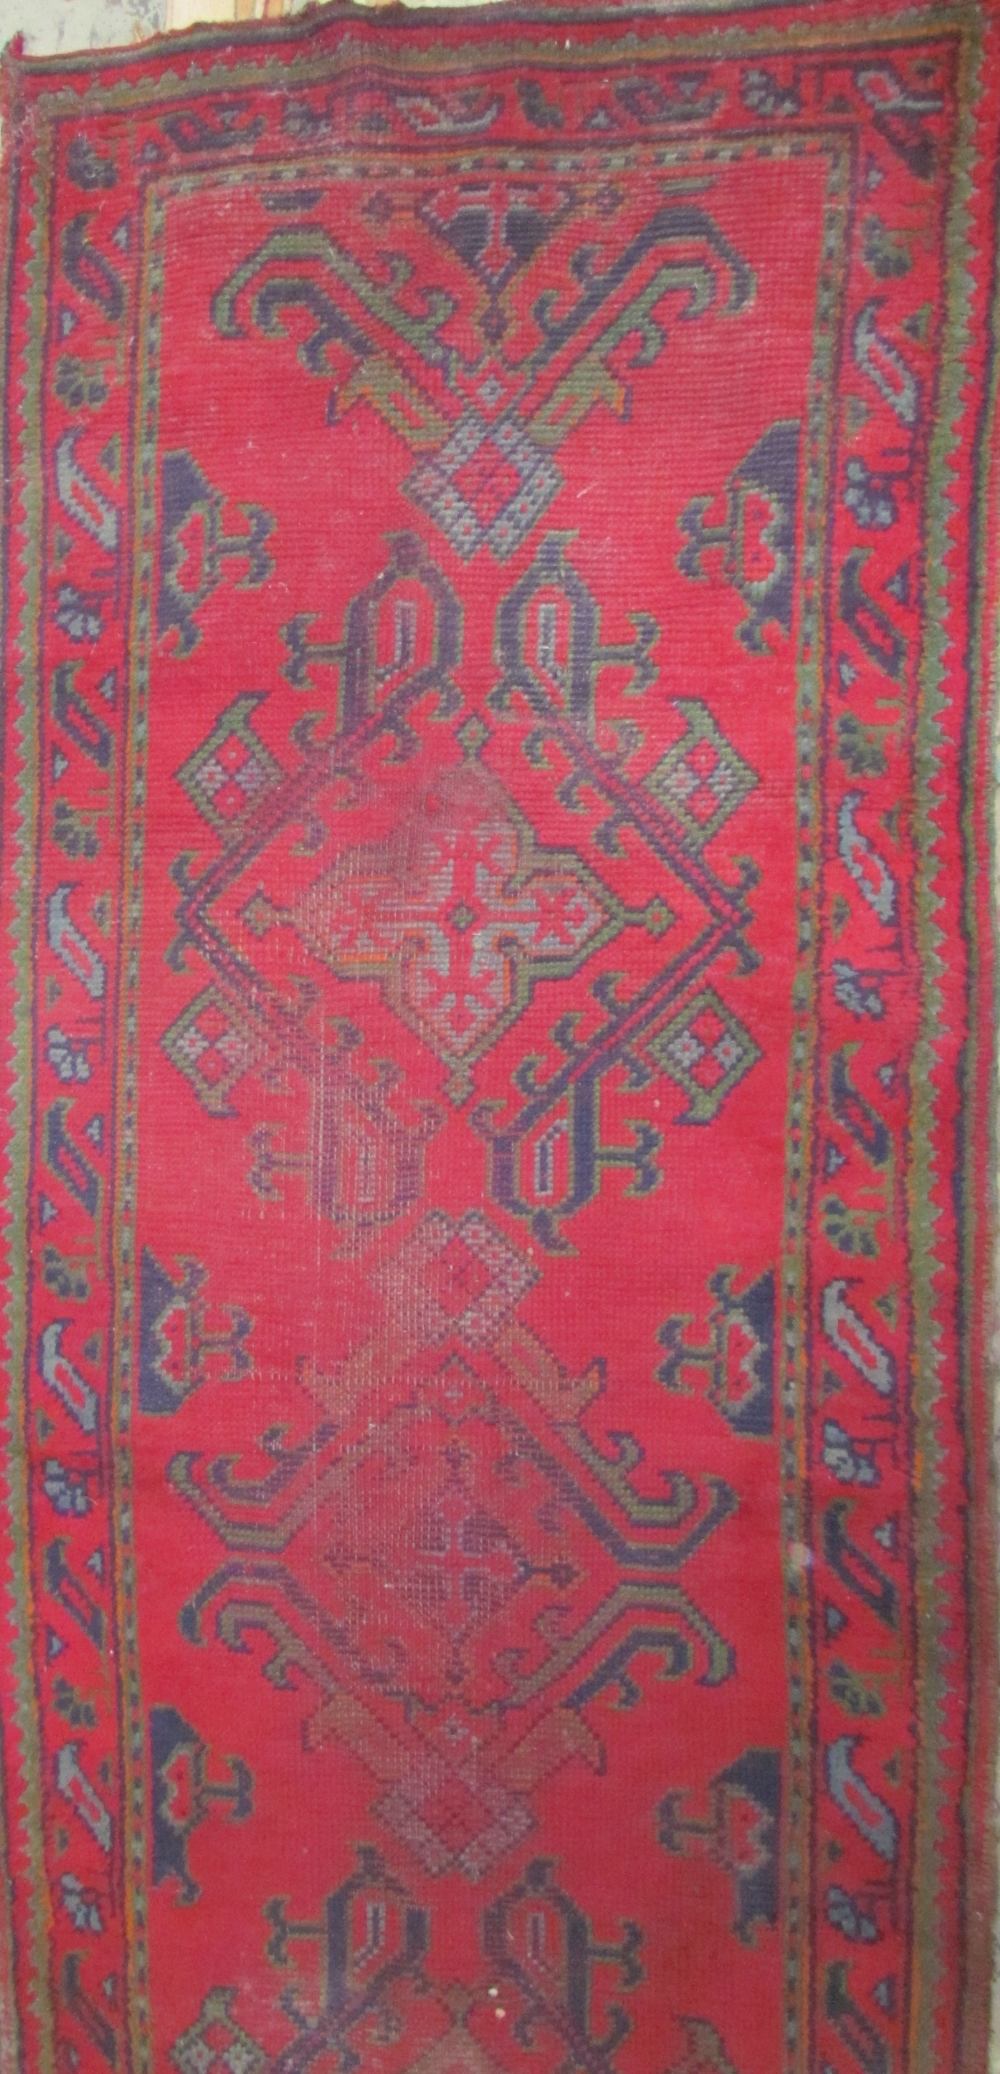 A red ground runner with a geometric design together with a prayer rug with central mihrab and a - Image 3 of 3